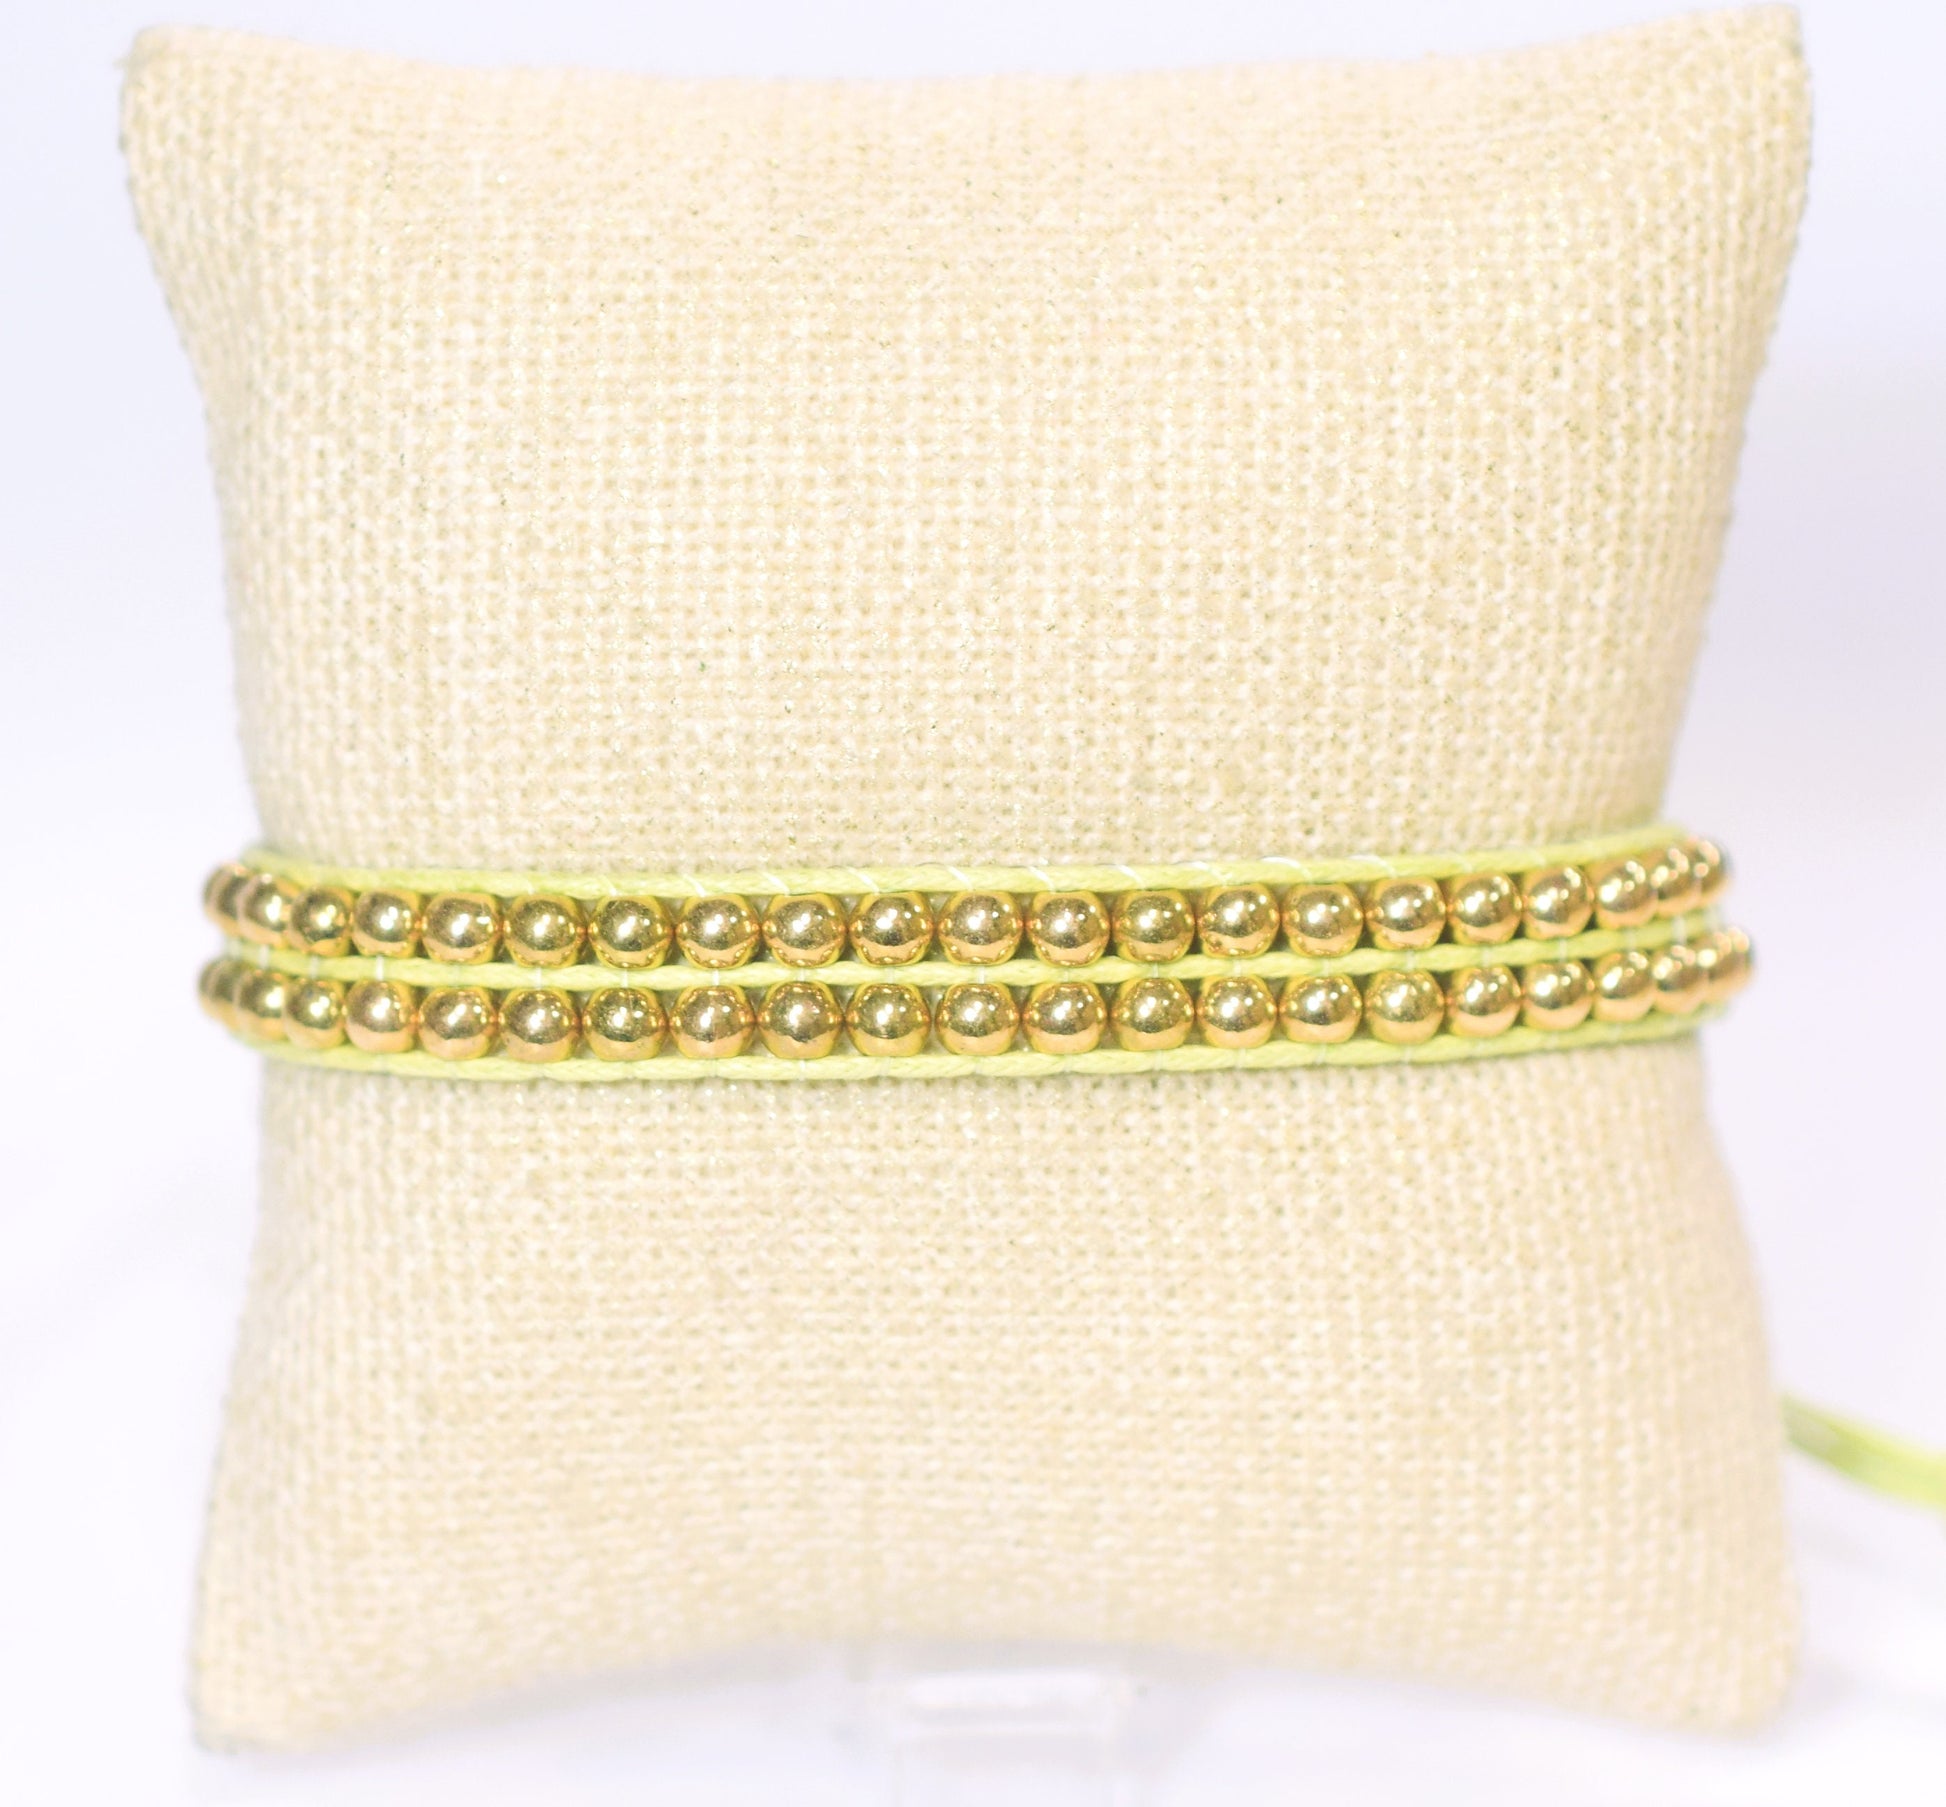 1 dollar for dozen Gold Beads 4mm Macrame Hand Made Bracelet 6 colors 56 Beads in one bracelet and wholesale